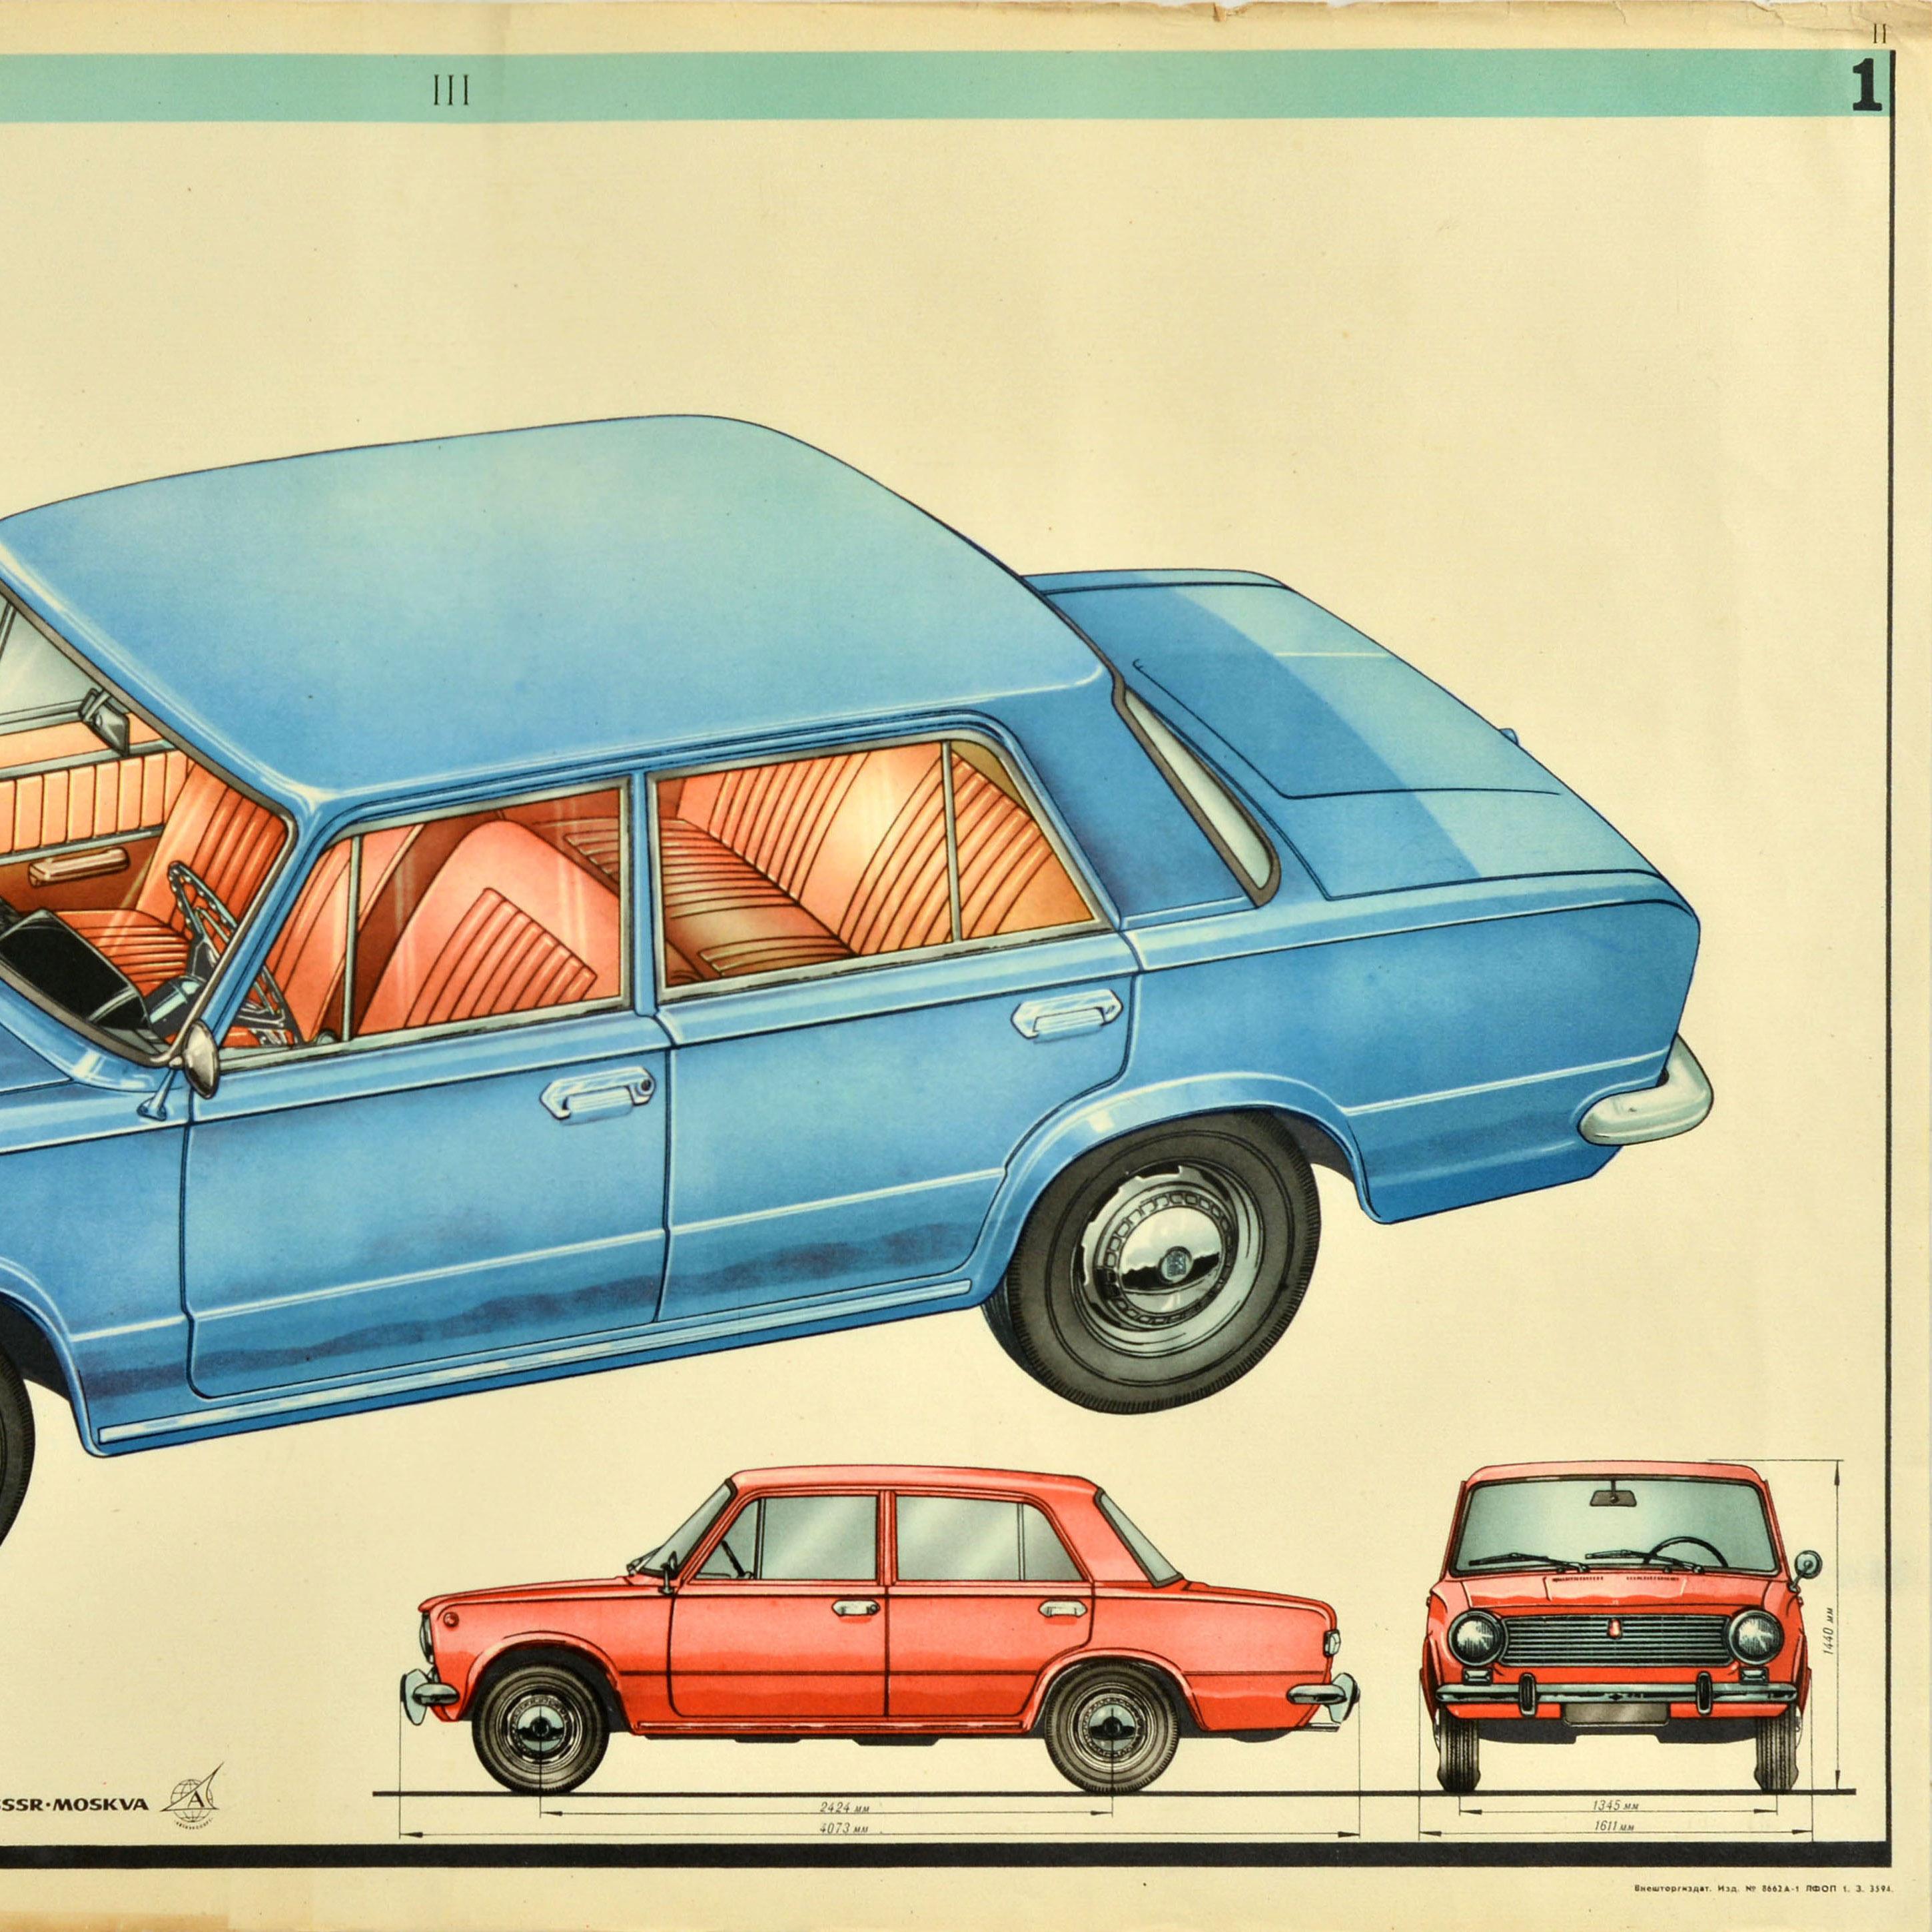 Original vintage car advertising poster for Lada showing the exterior and the interior of the vehicle with smaller images of the dashboard and panel board as well as the dimensions of the car from the front and side, the text below - v/o Avtoexport